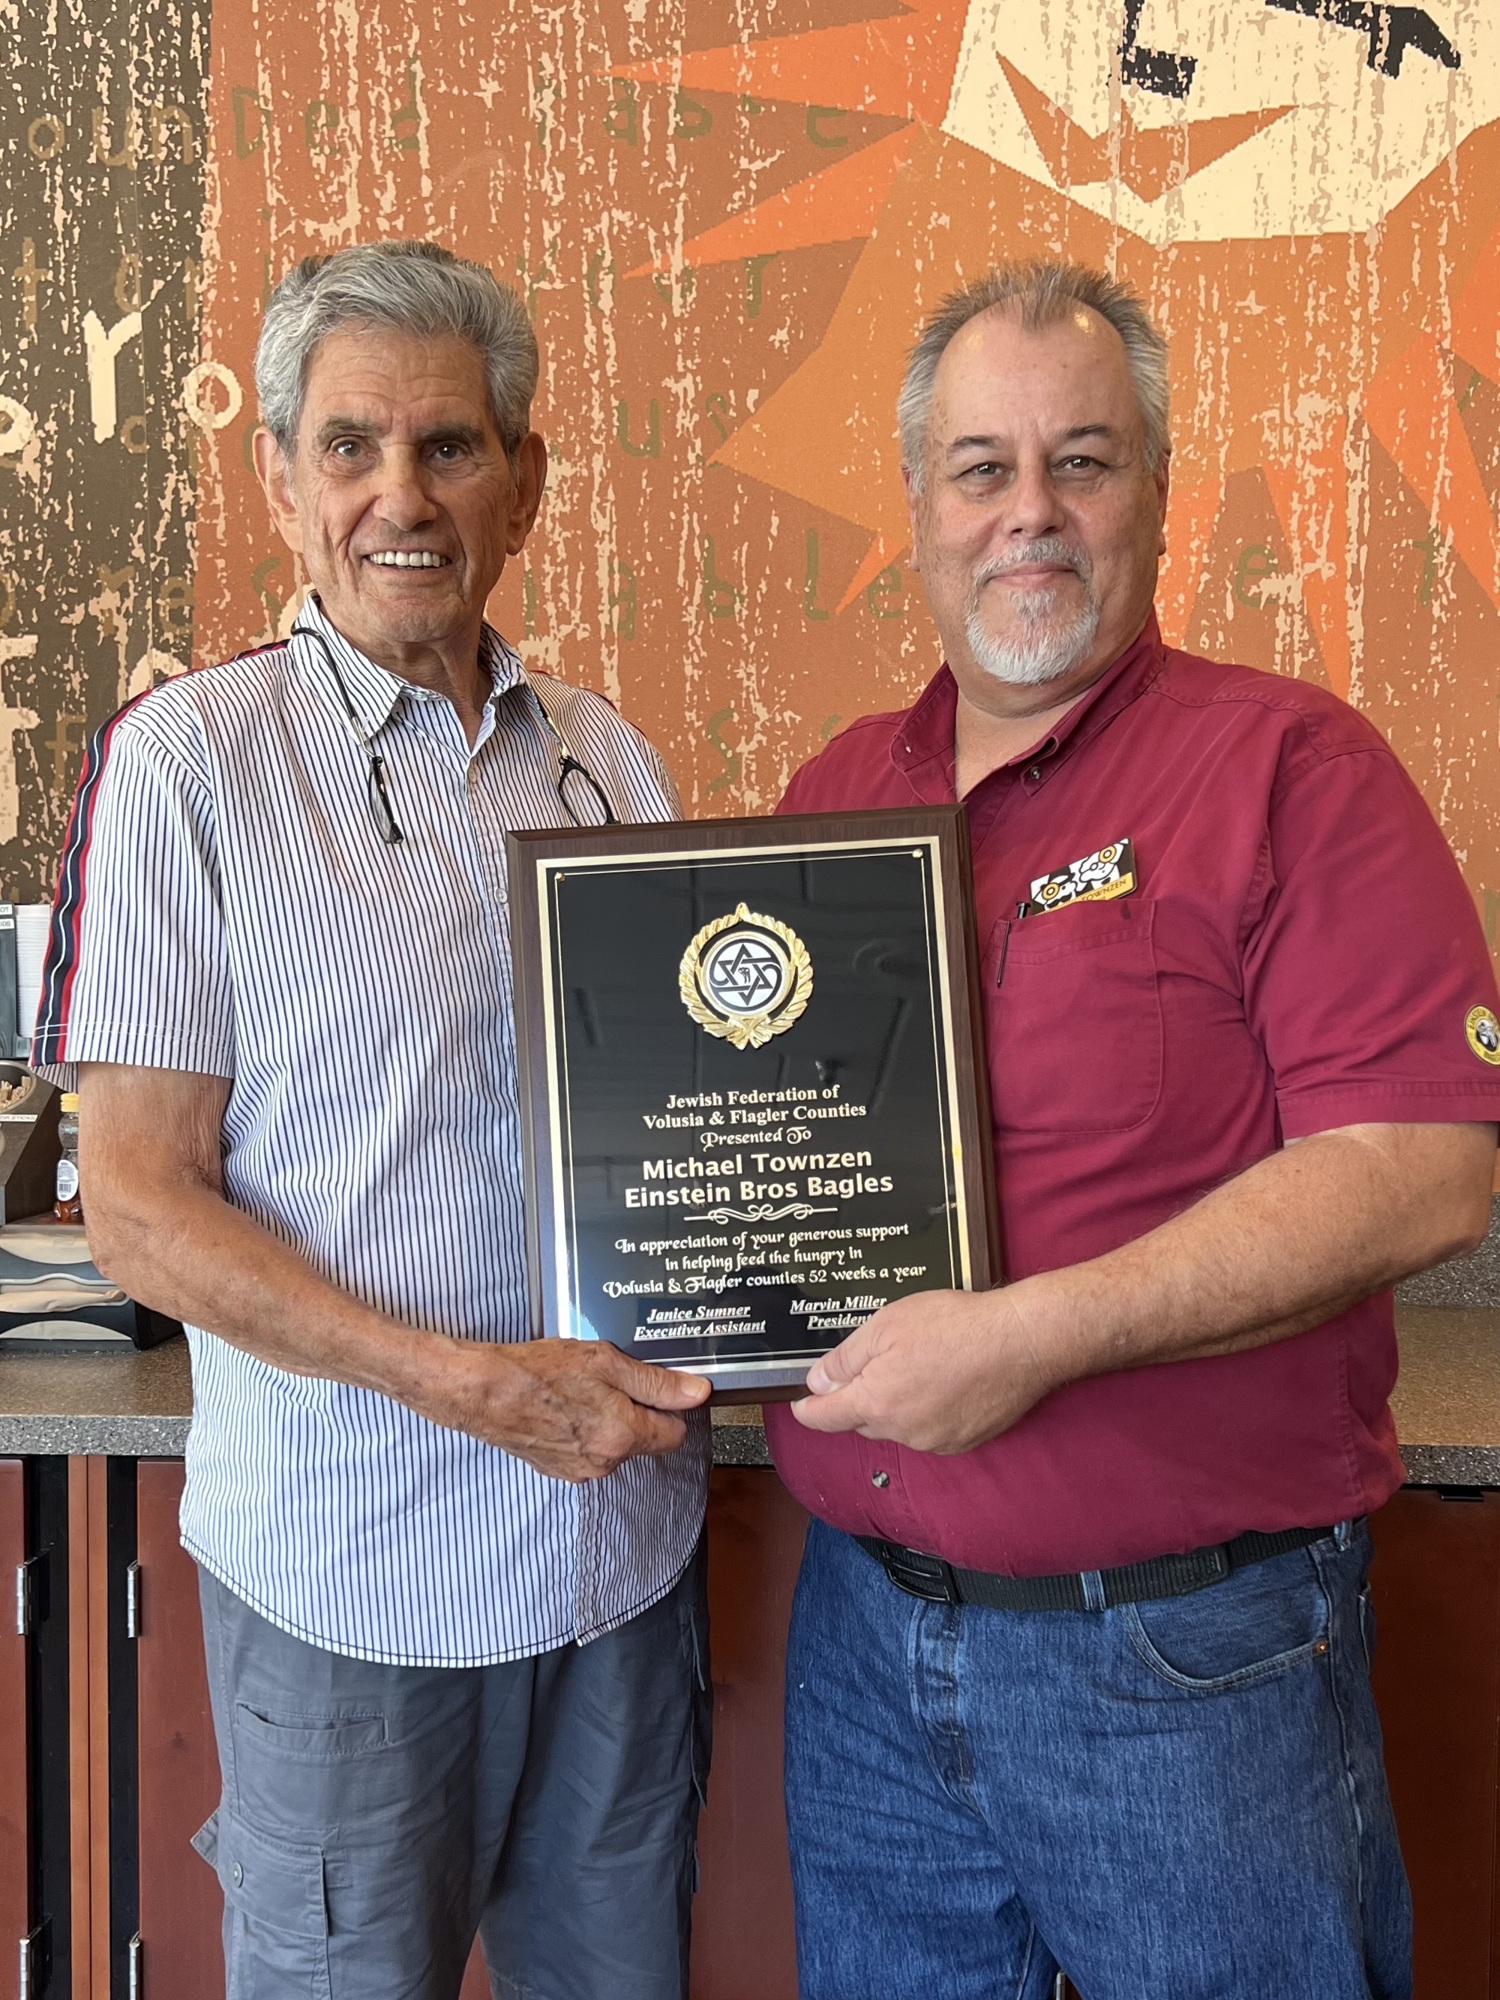 Marvin Miller, president of the Jewish Federation of Volusia and Flagler Counties, and Michael Townzen, general manager of the local Einstein Bros. Bagels. Courtesy photo